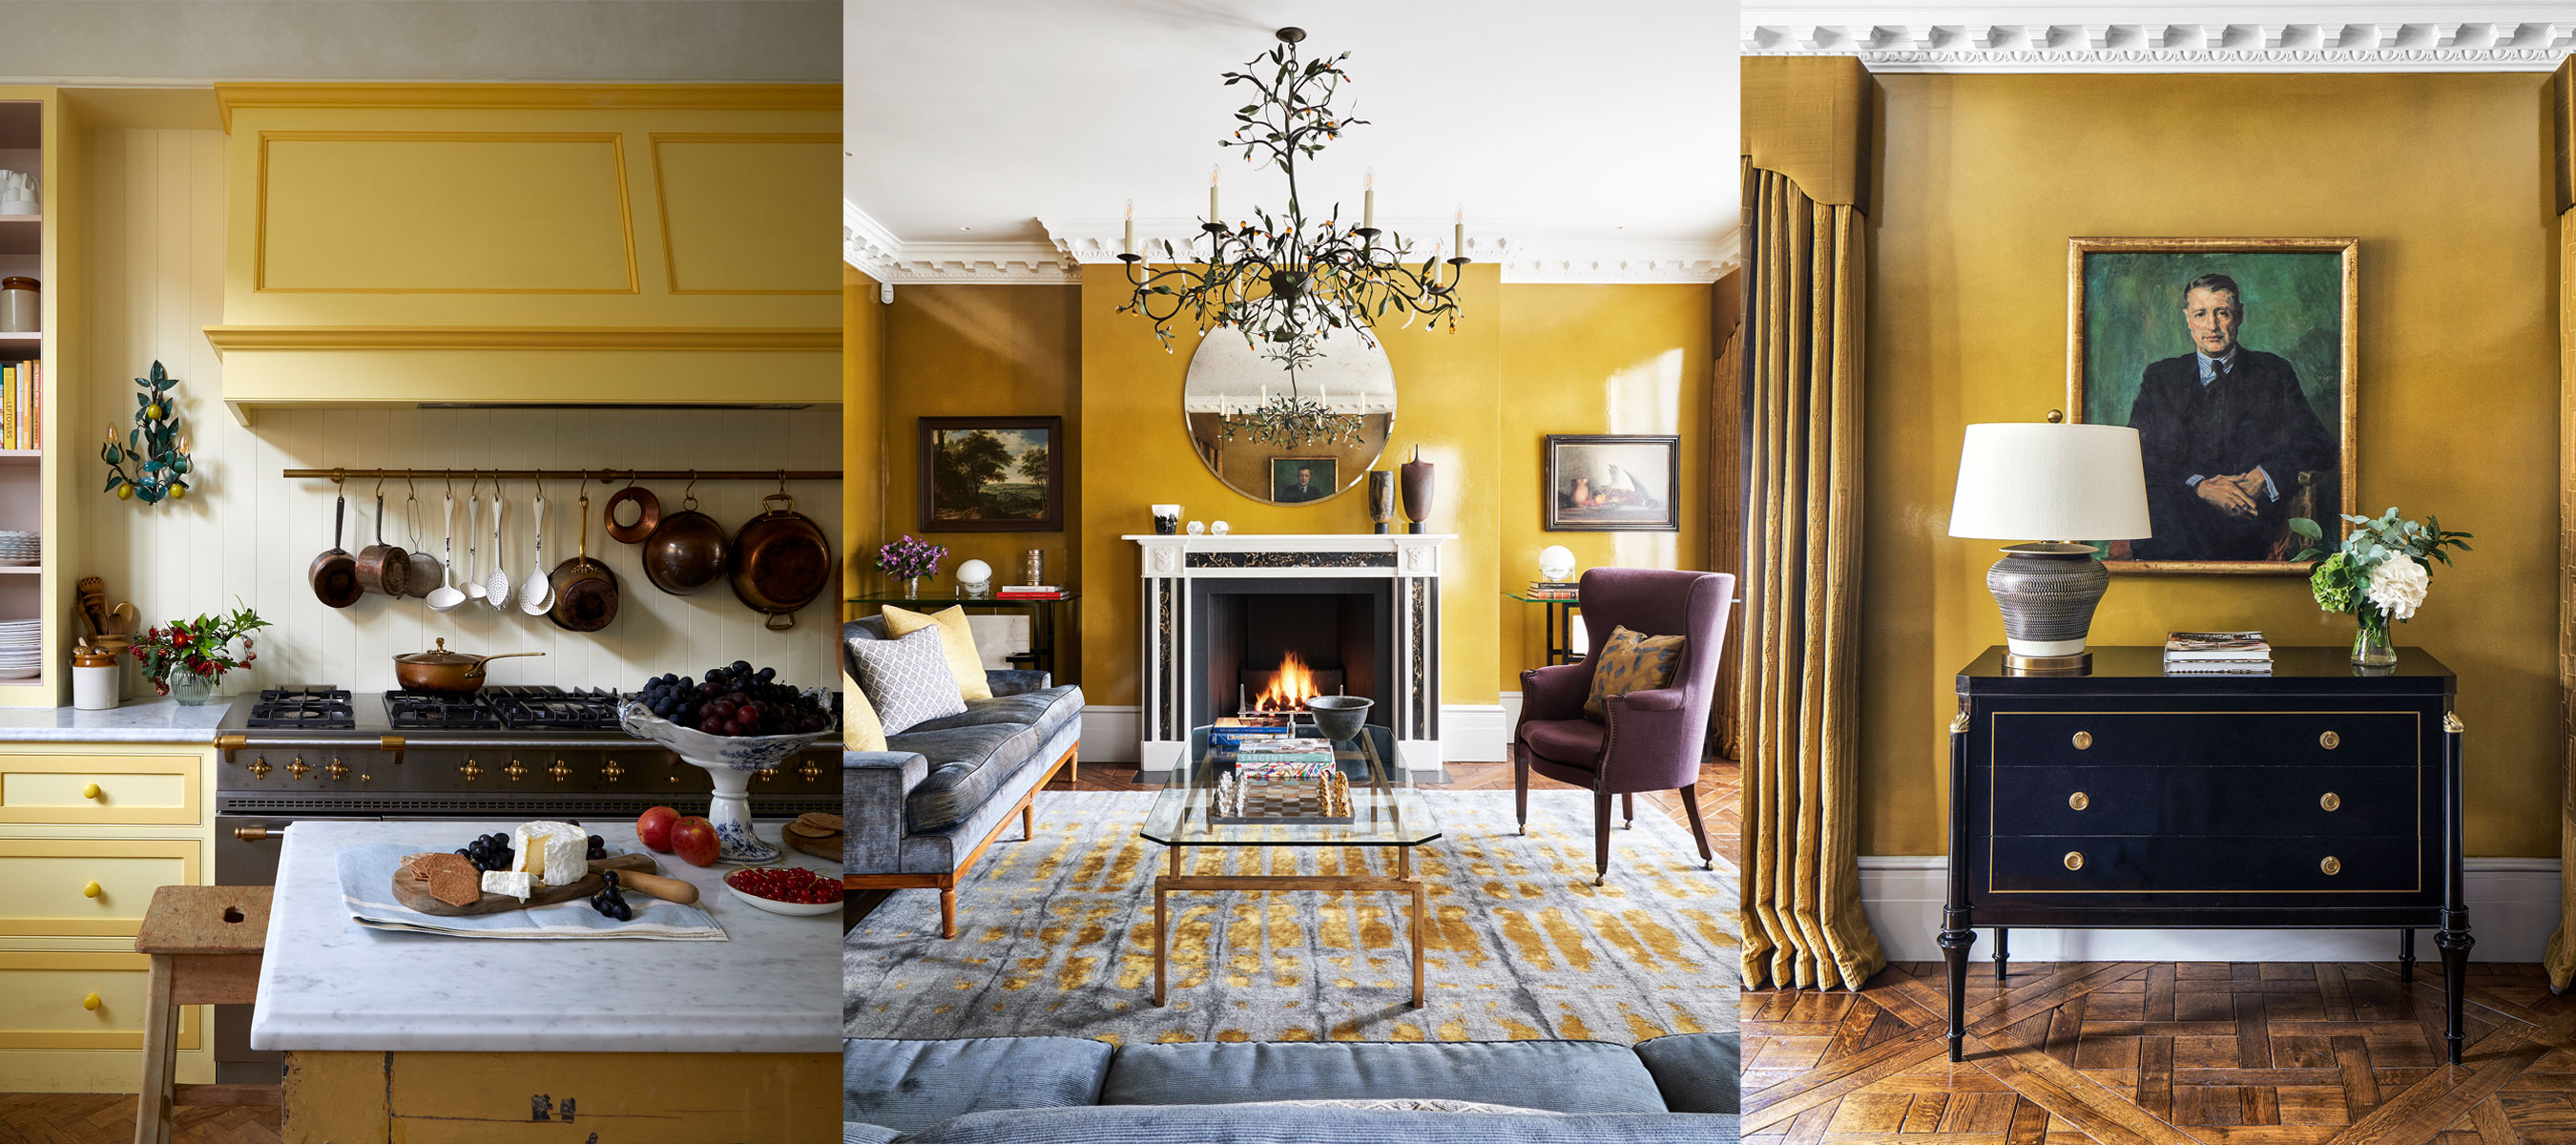 Yellow room ideas: 20 ways to decorate with a yellow color scheme |